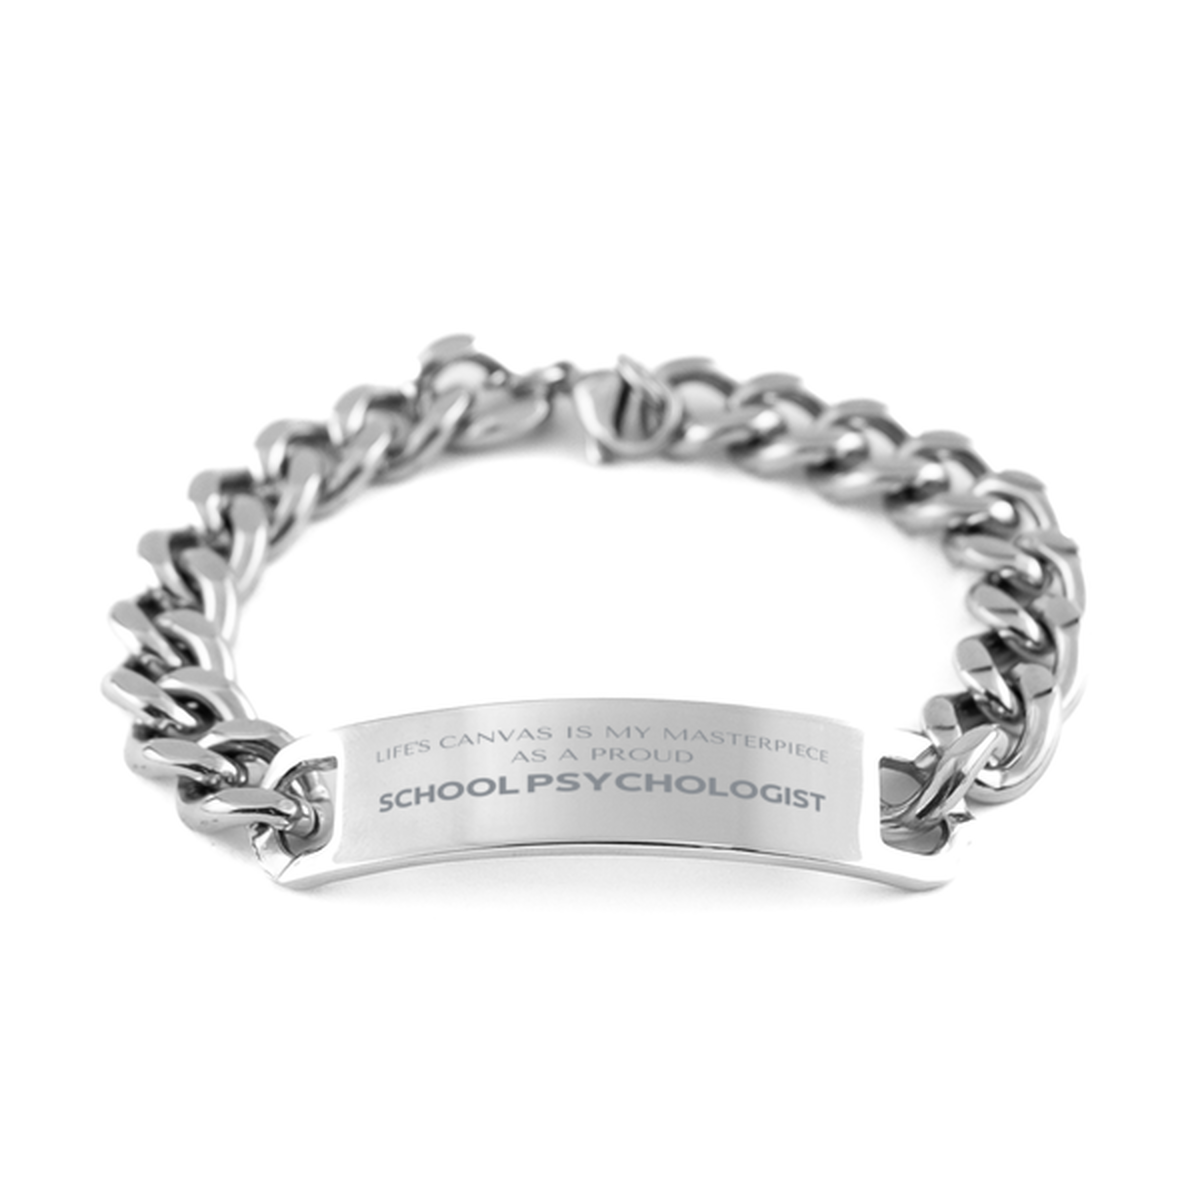 Proud School Psychologist Gifts, Life's canvas is my masterpiece, Epic Birthday Christmas Unique Cuban Chain Stainless Steel Bracelet For School Psychologist, Coworkers, Men, Women, Friends